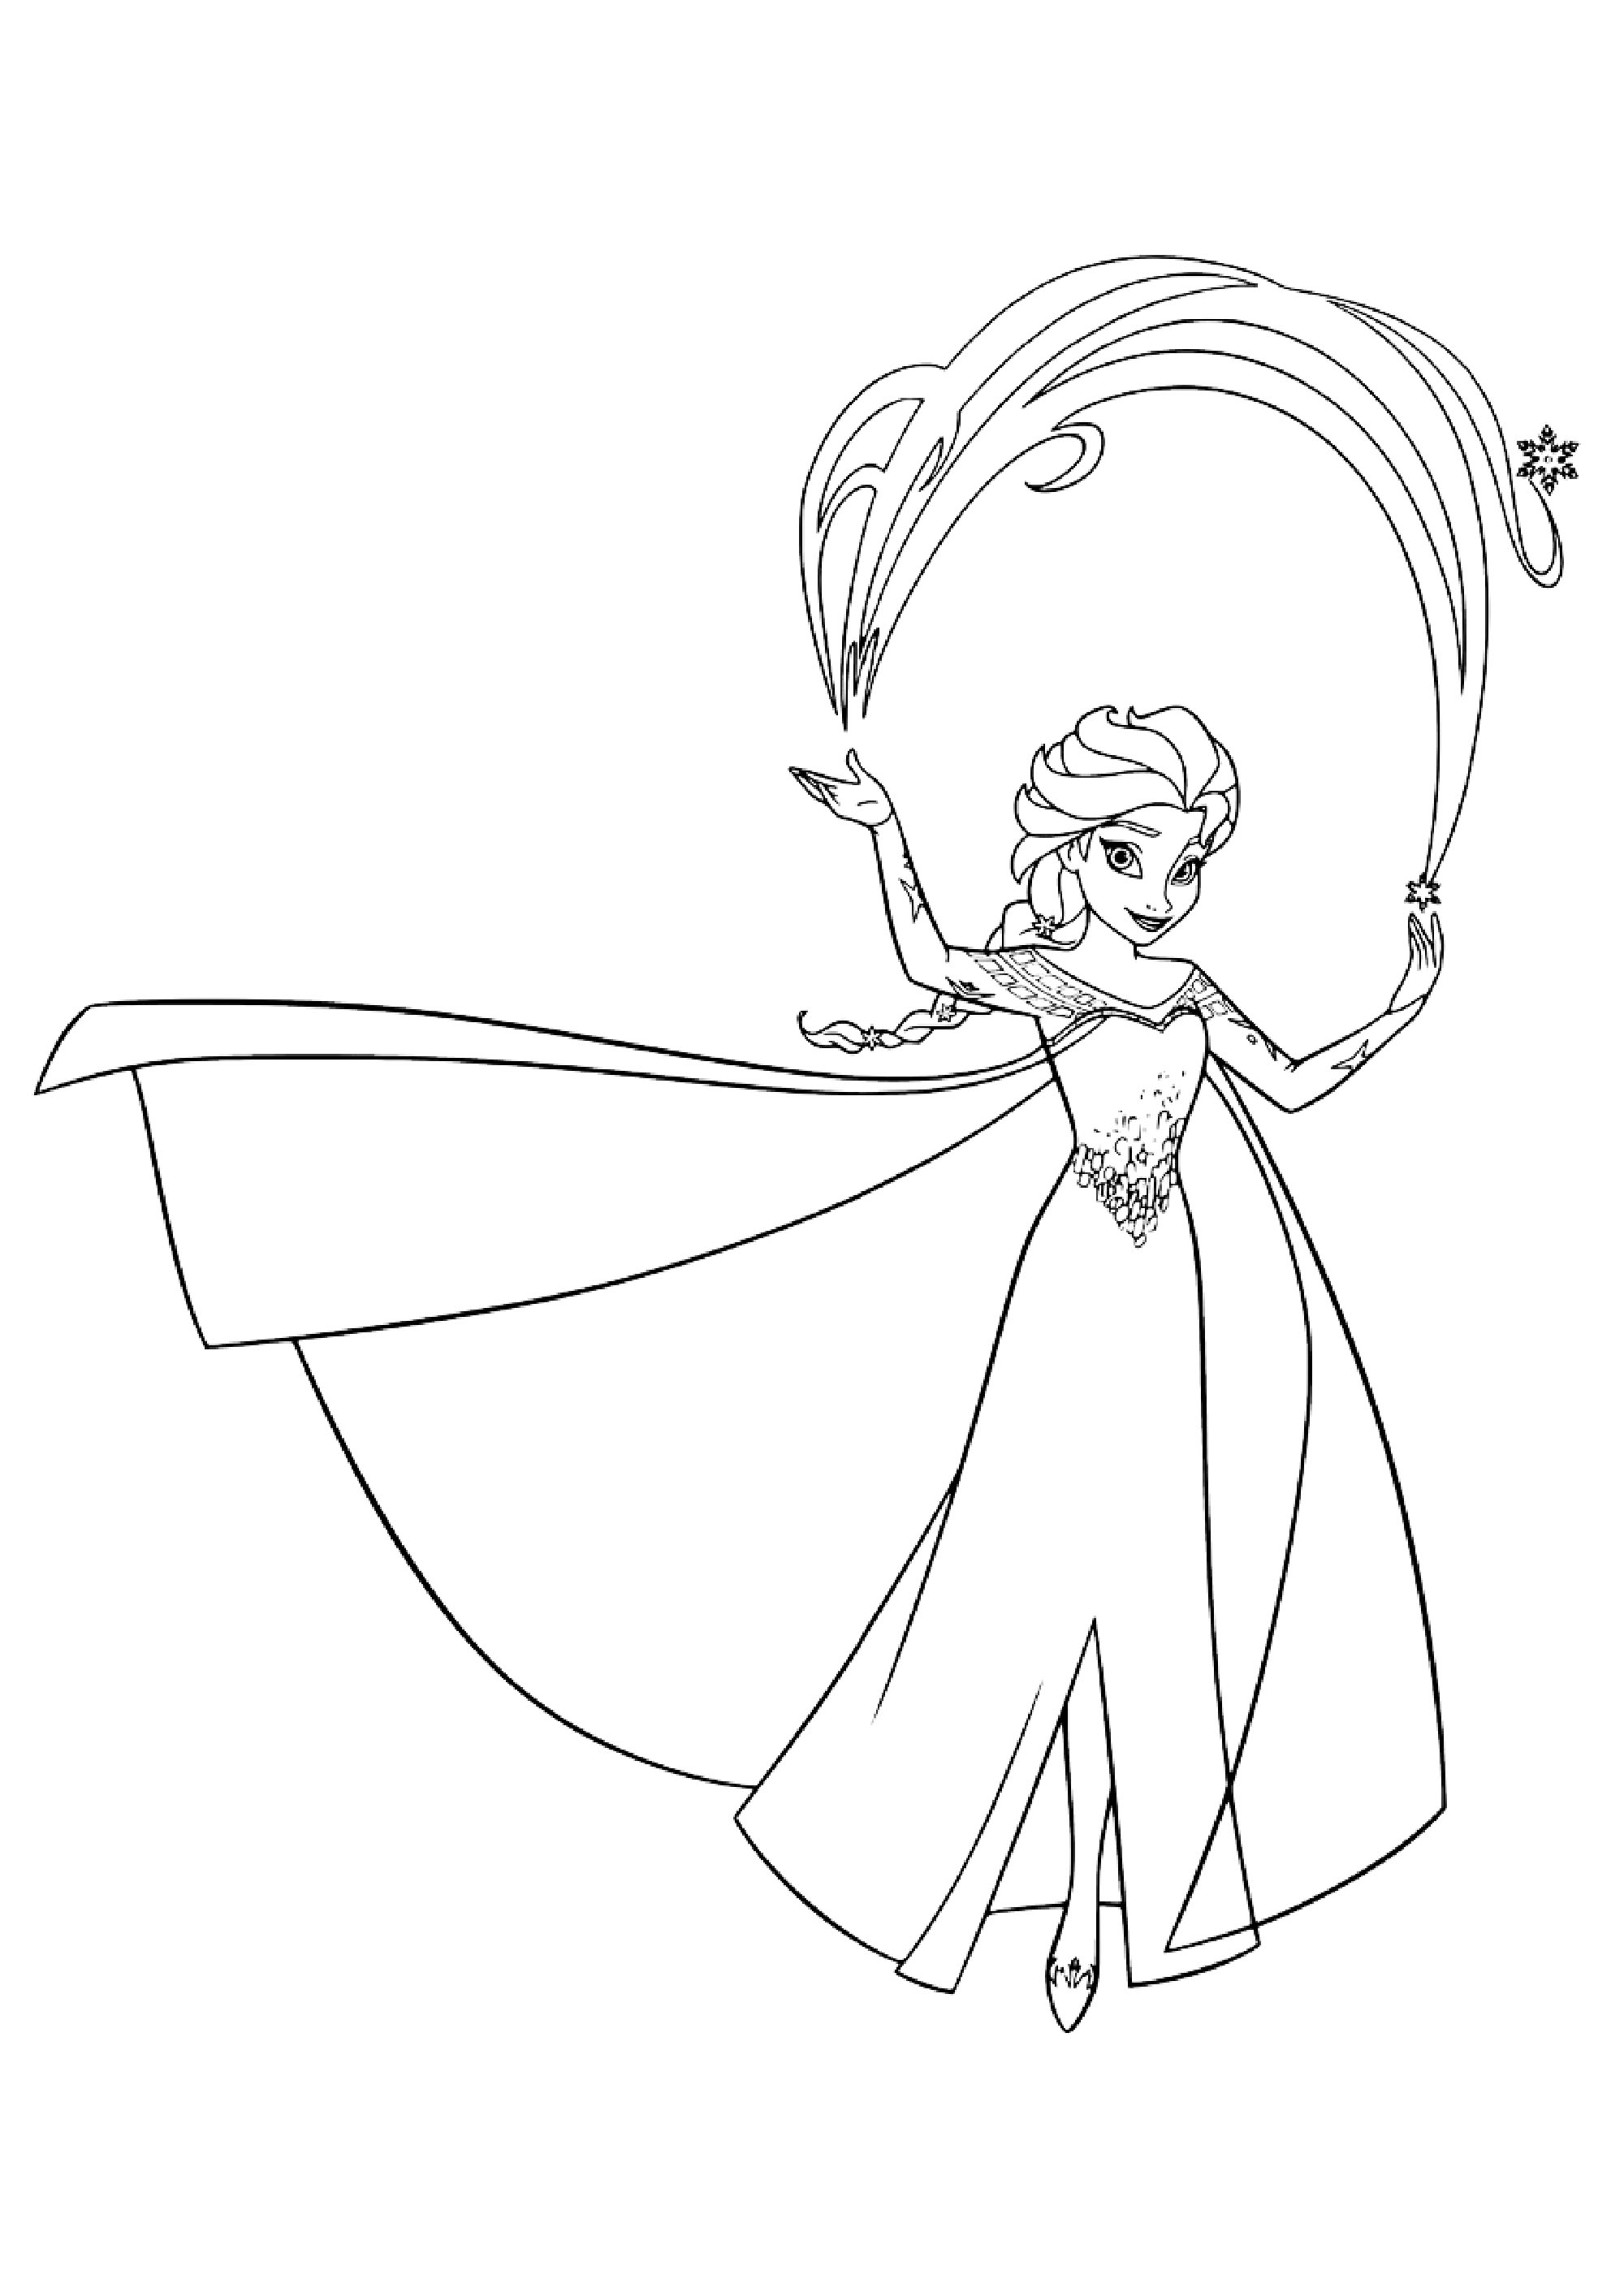 Funny Frozen 2 coloring page for kids